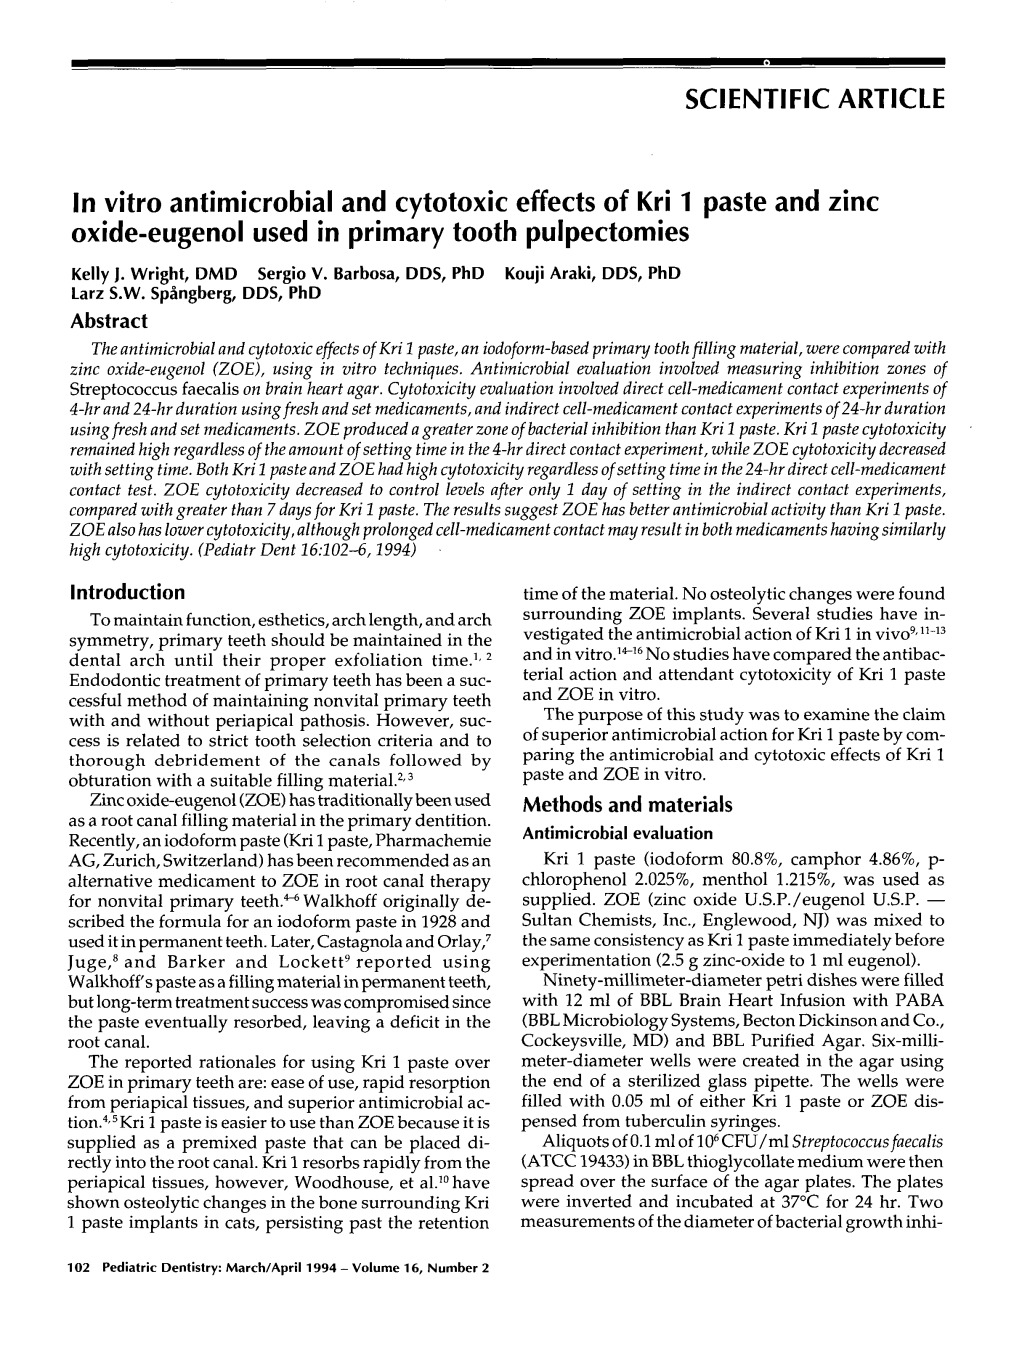 In Vitro Antimicrobial and Cytotoxic Effects of Kri 1 Paste And